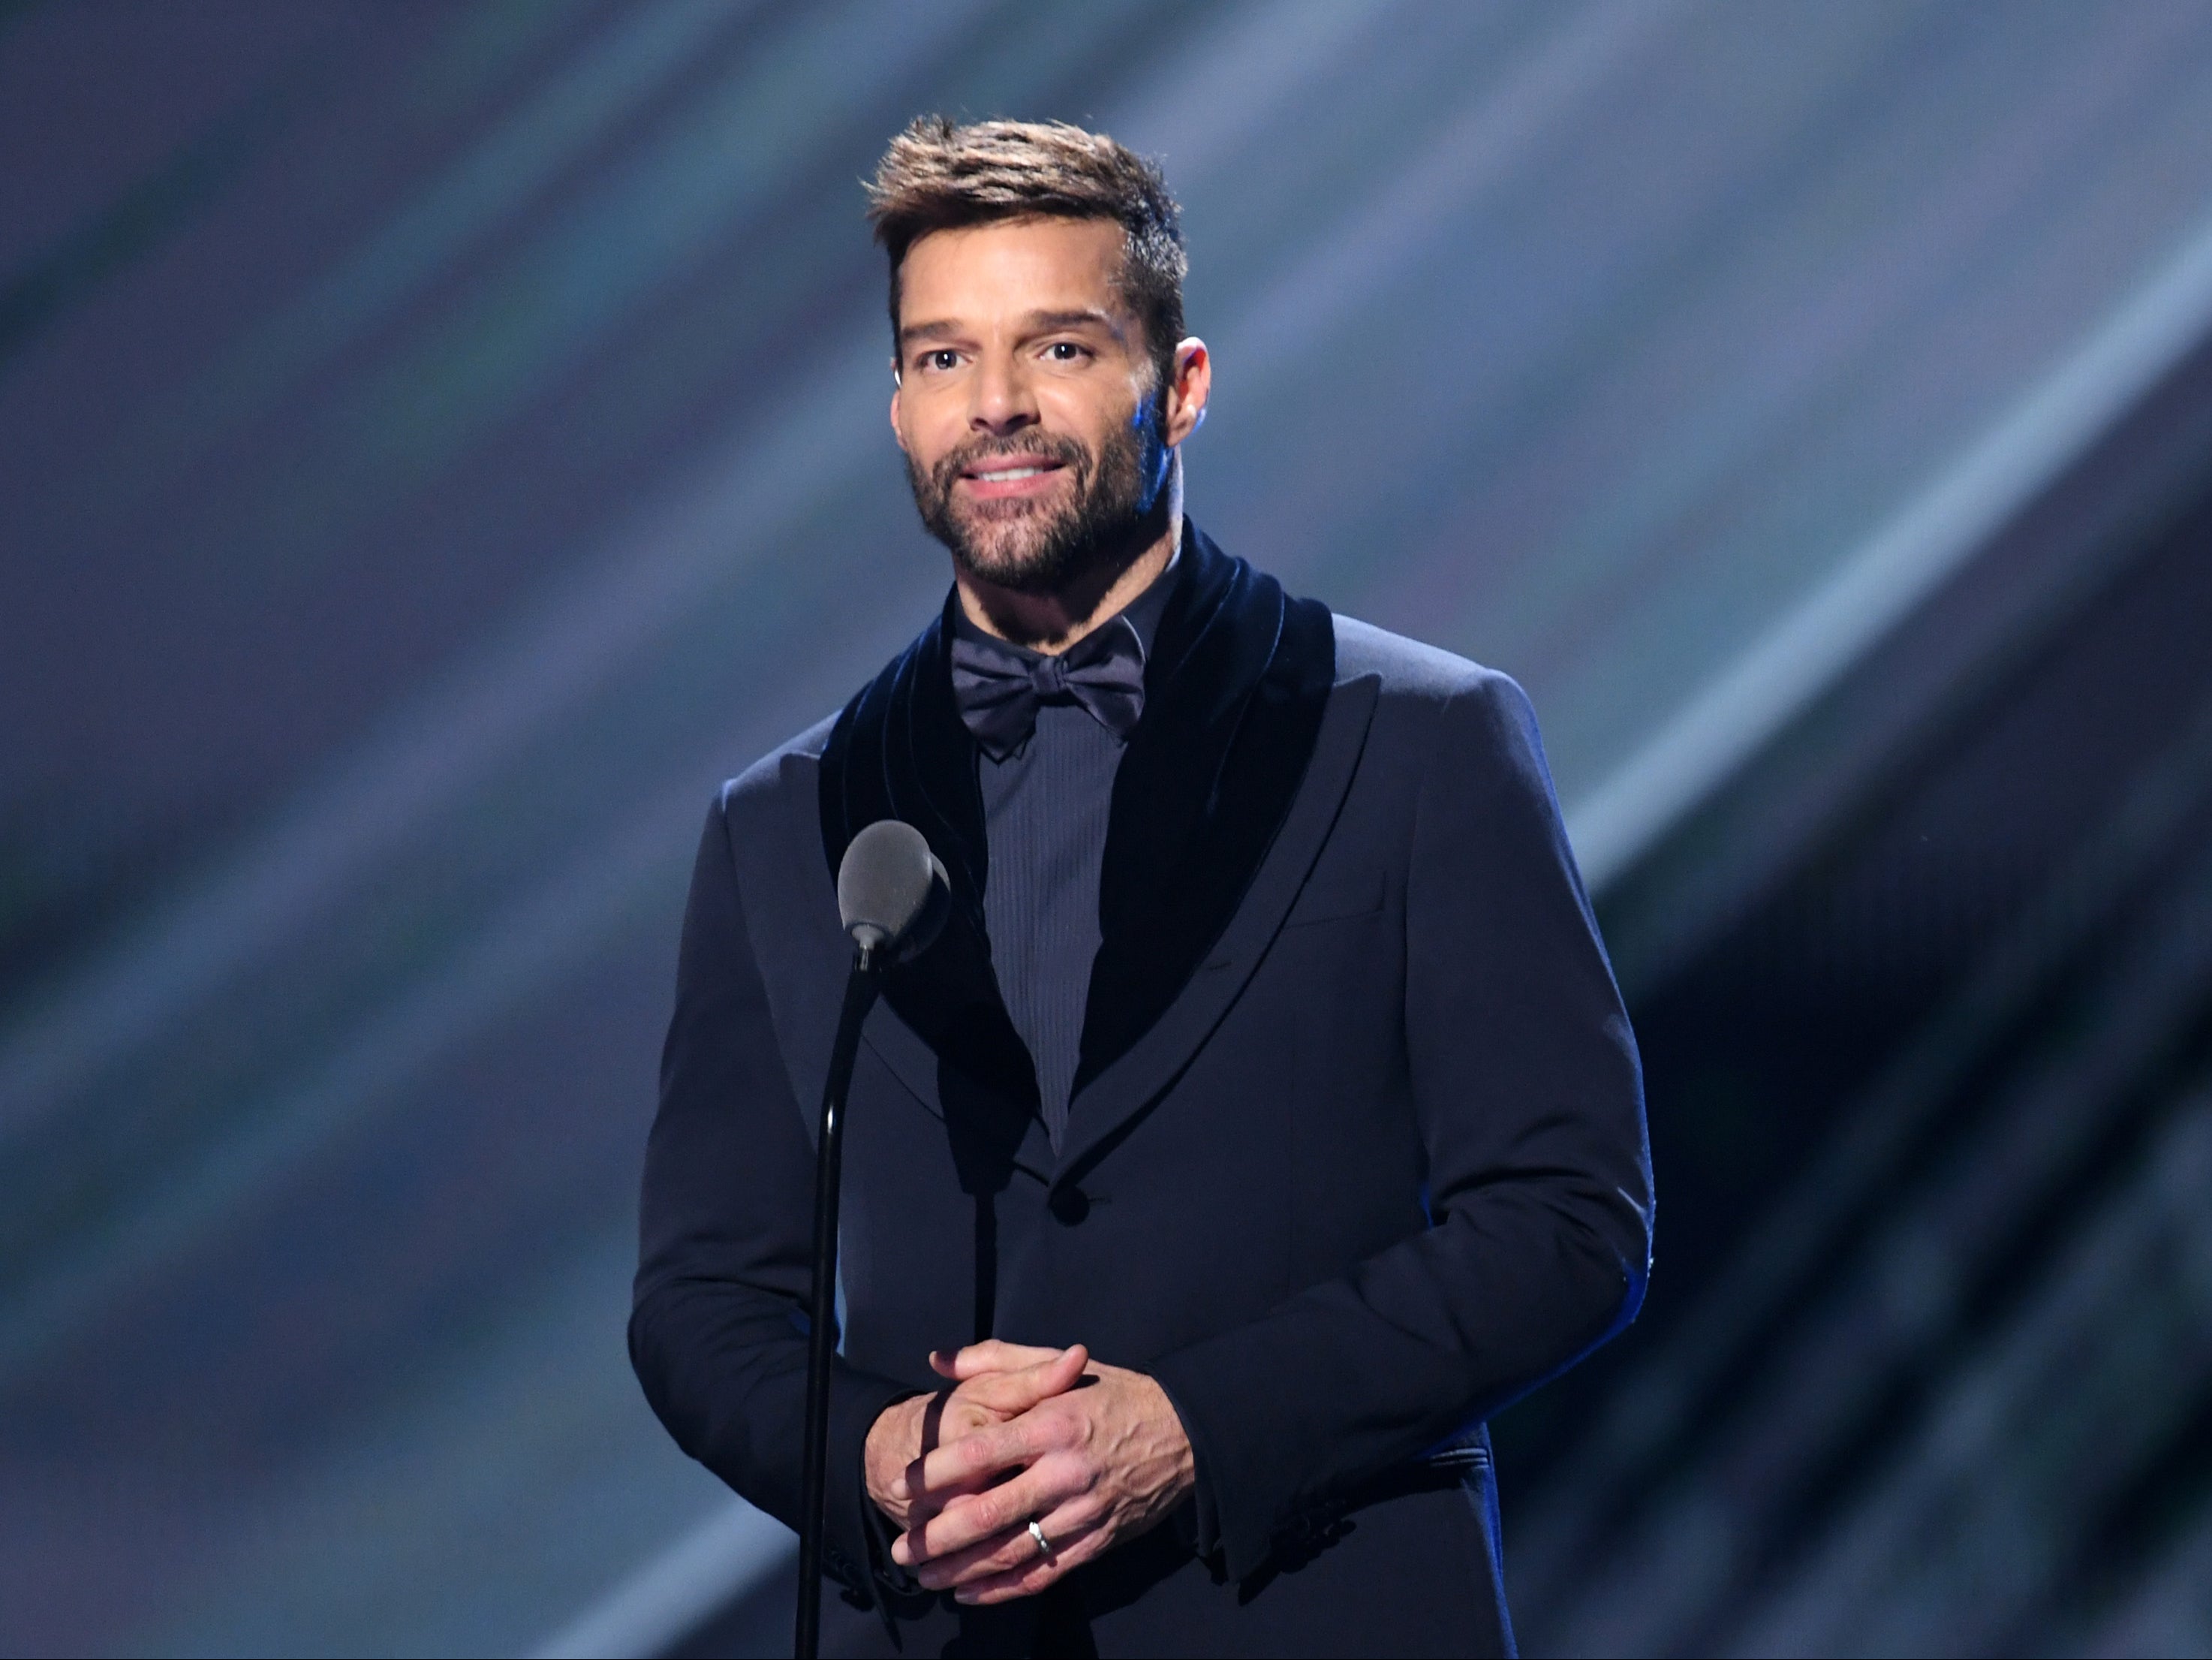 Ricky Martin presents the Album of The Year Award onstage during the 20th annual Latin GRAMMY Awards at MGM Grand Garden Arena on November 14, 2019 in Las Vegas, Nevada.